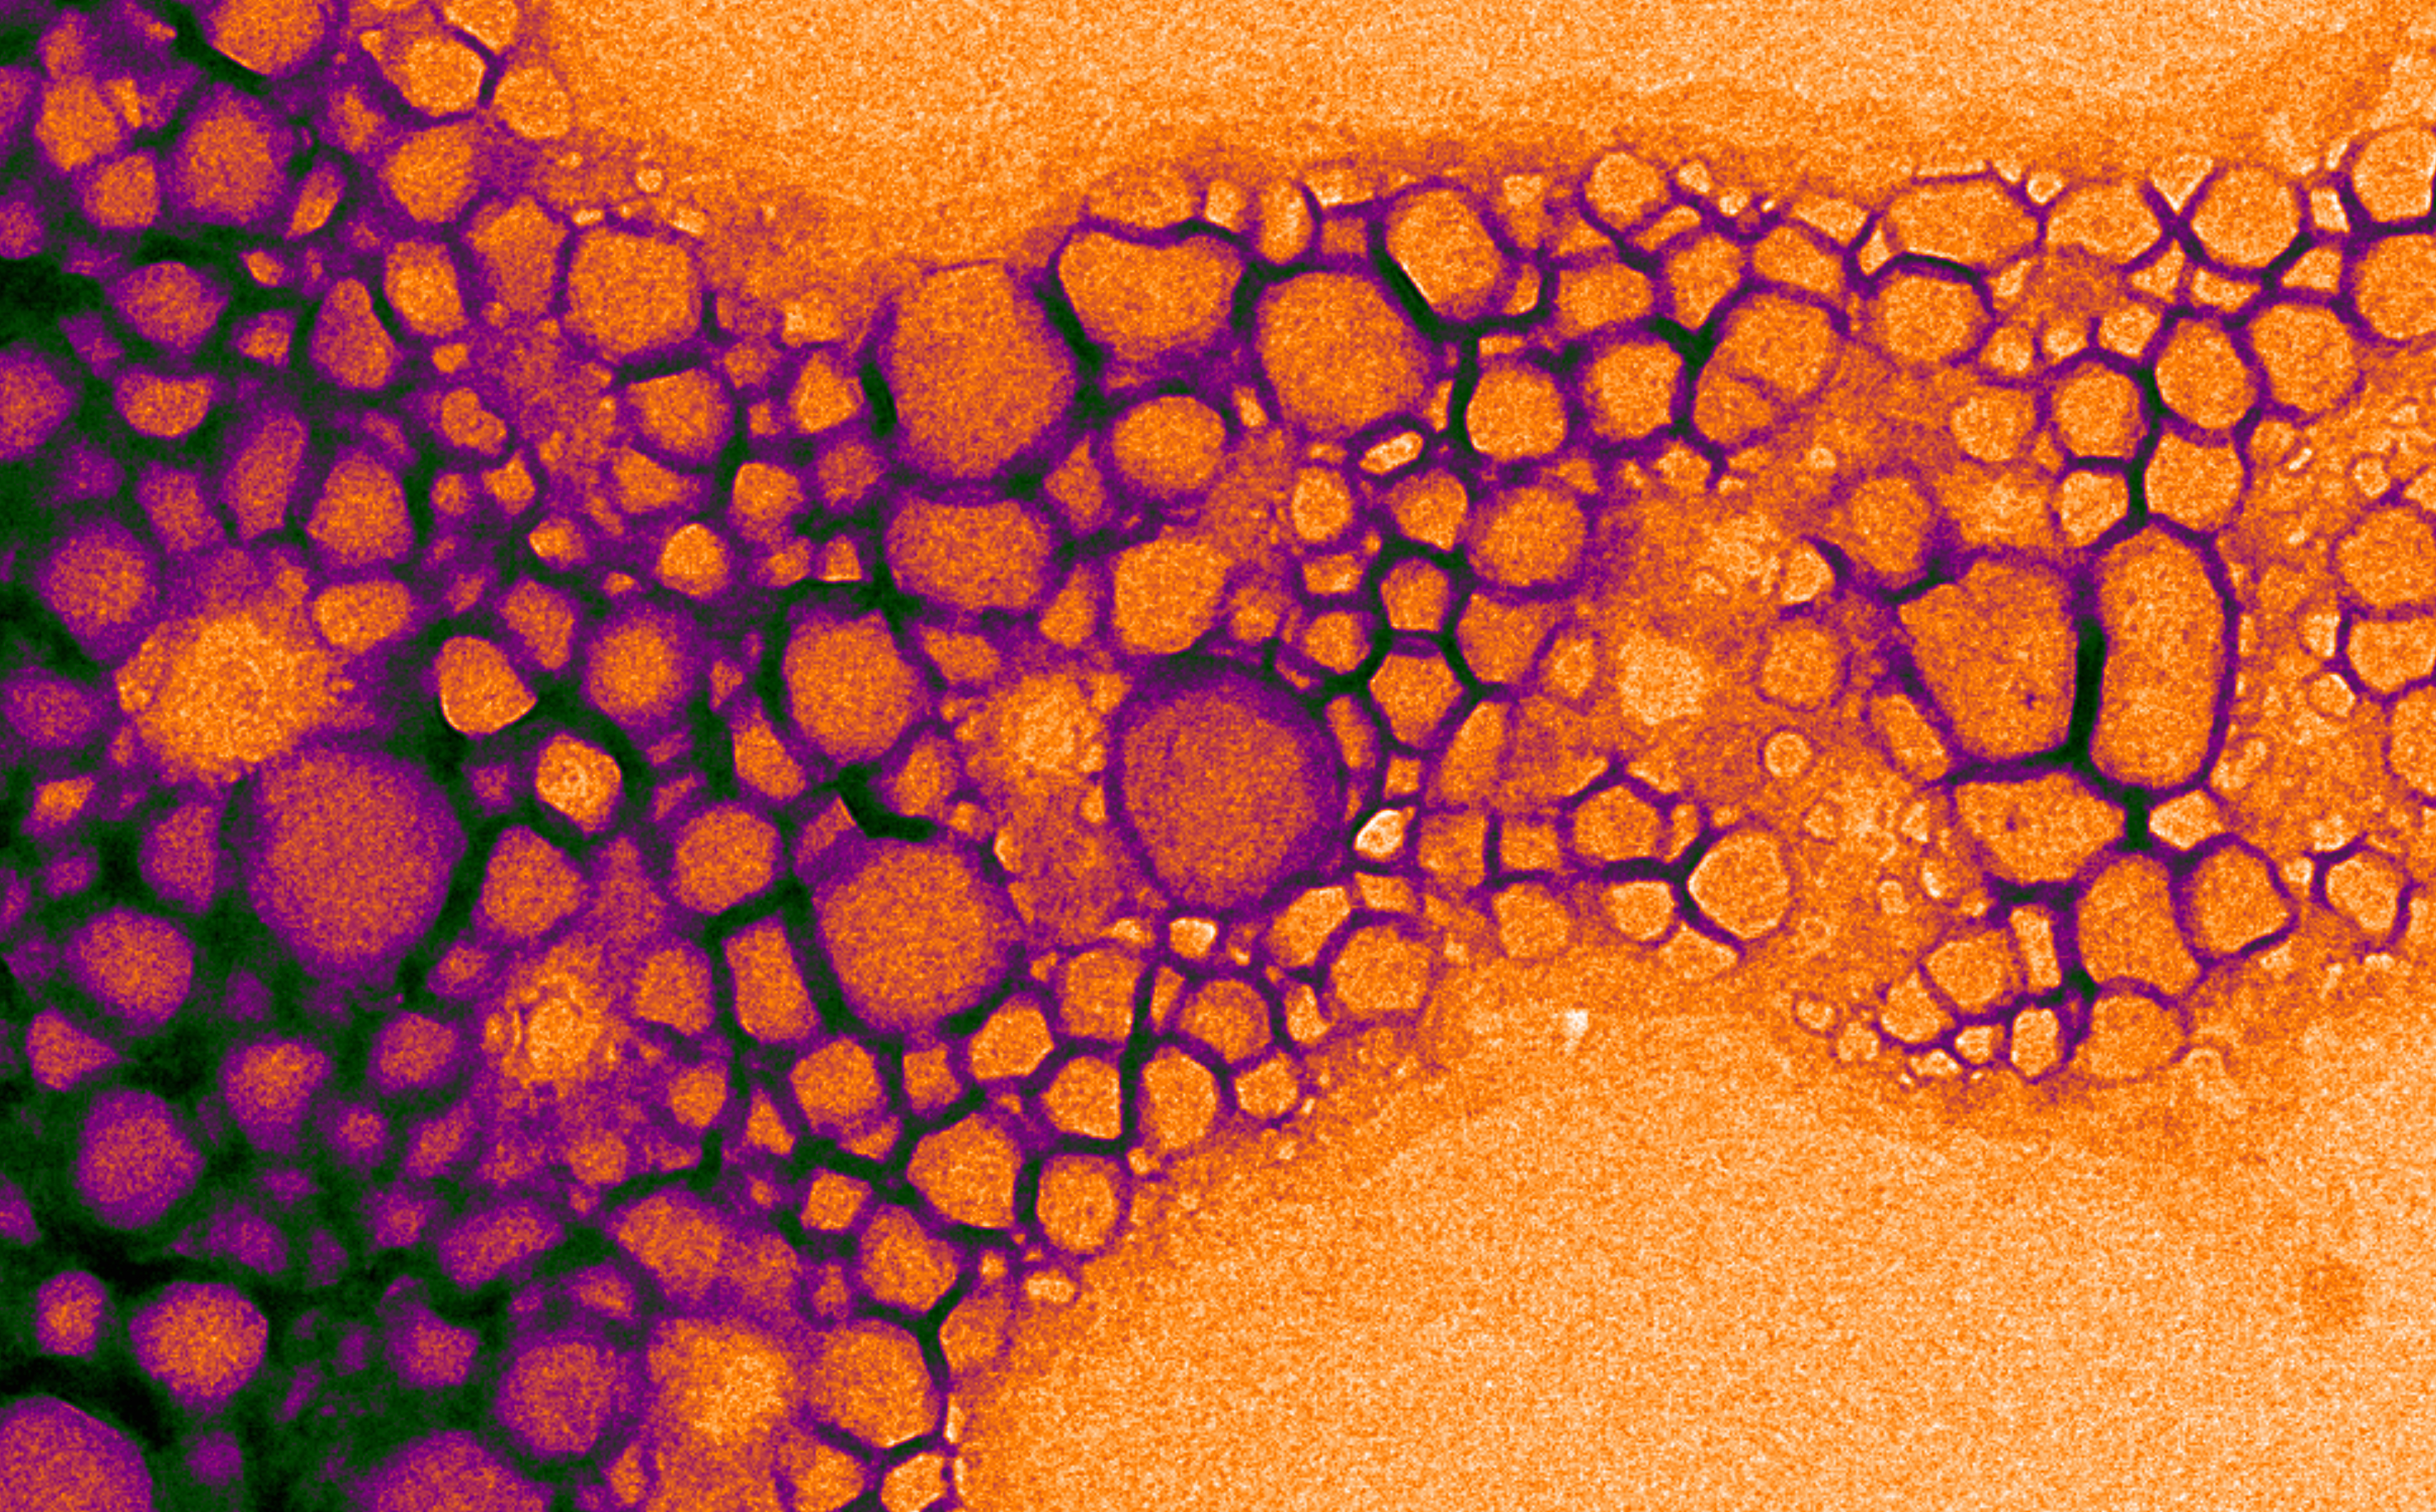 A pseudocolored transmission electron micrograph of nanodroplets filled with paramagnetic metals and perfluorocarbon materials.